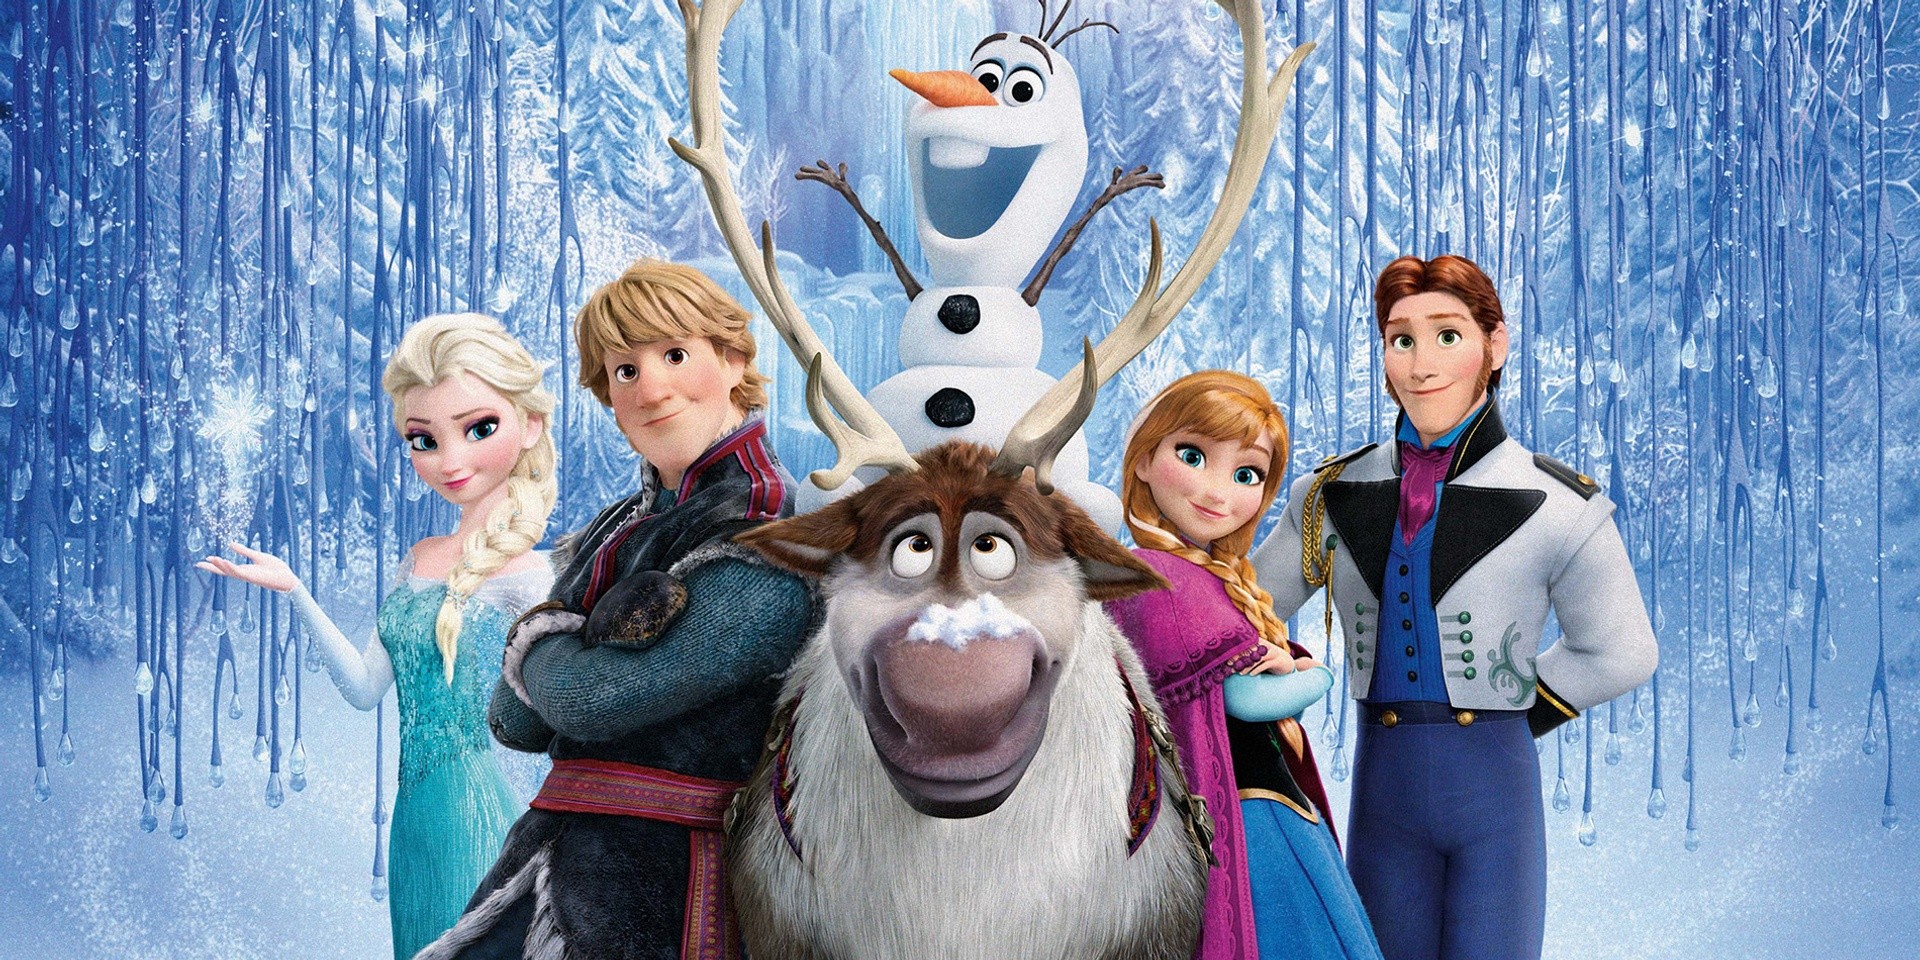 Disney's Frozen is getting the live orchestral treatment in Singapore